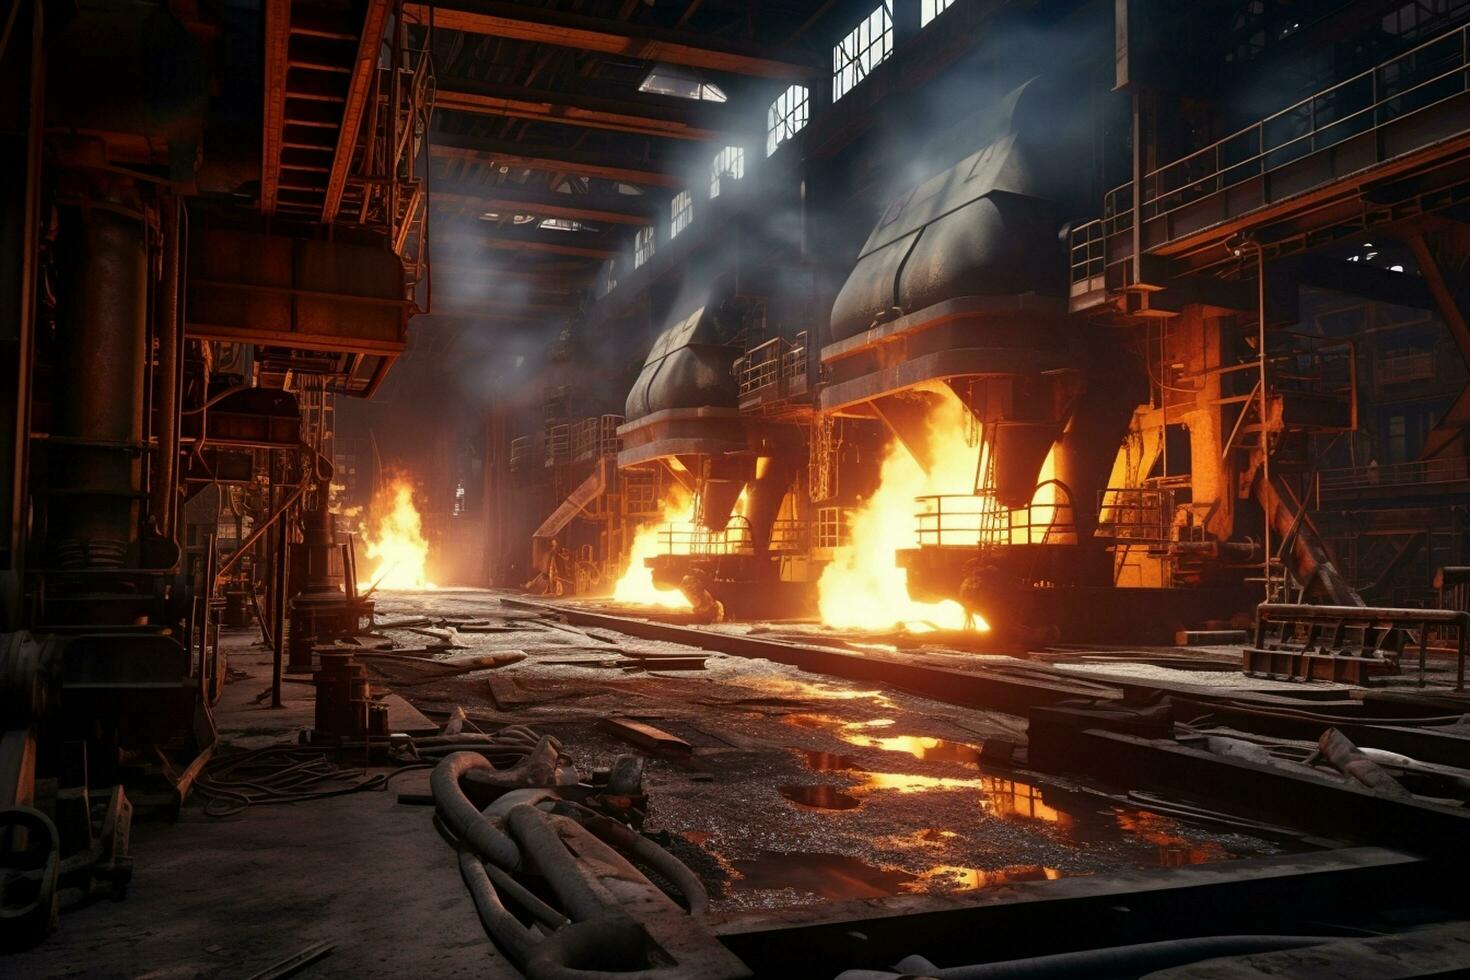 AI Generated Plant mill work metallurgical industrial factory steel hot furnace equipment heat melting iron casting metallic metallurgy production smelting fire foundry manufacture heavy photo